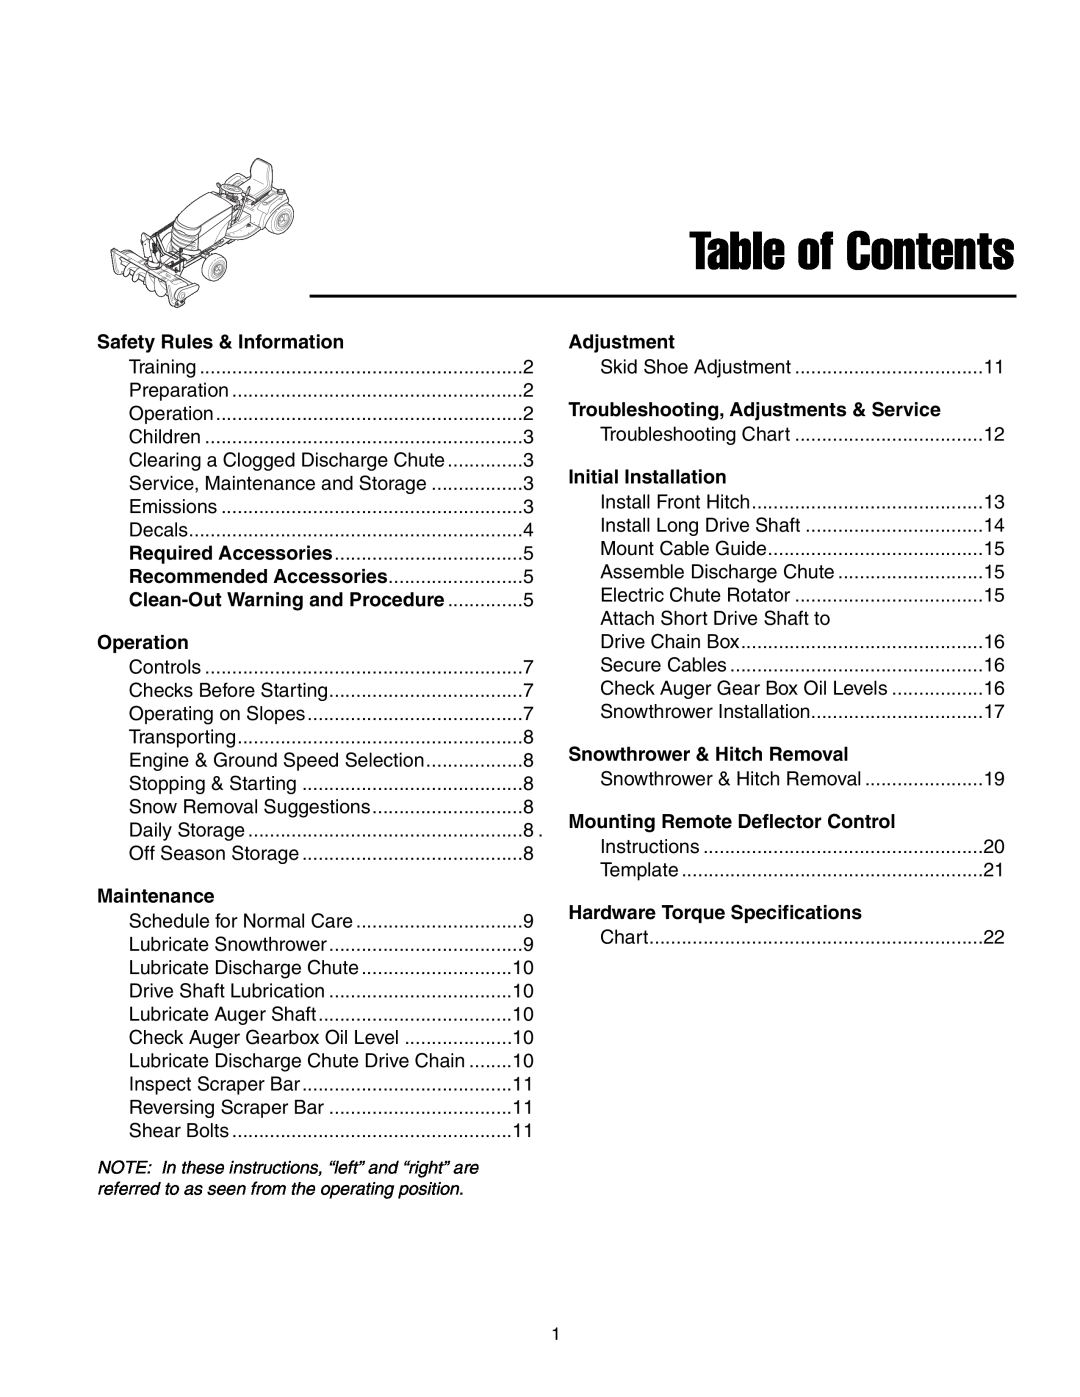 Massey Ferguson L&G 1694404 manual Table of Contents, Safety Rules & Information, Operation, Maintenance, Adjustment 